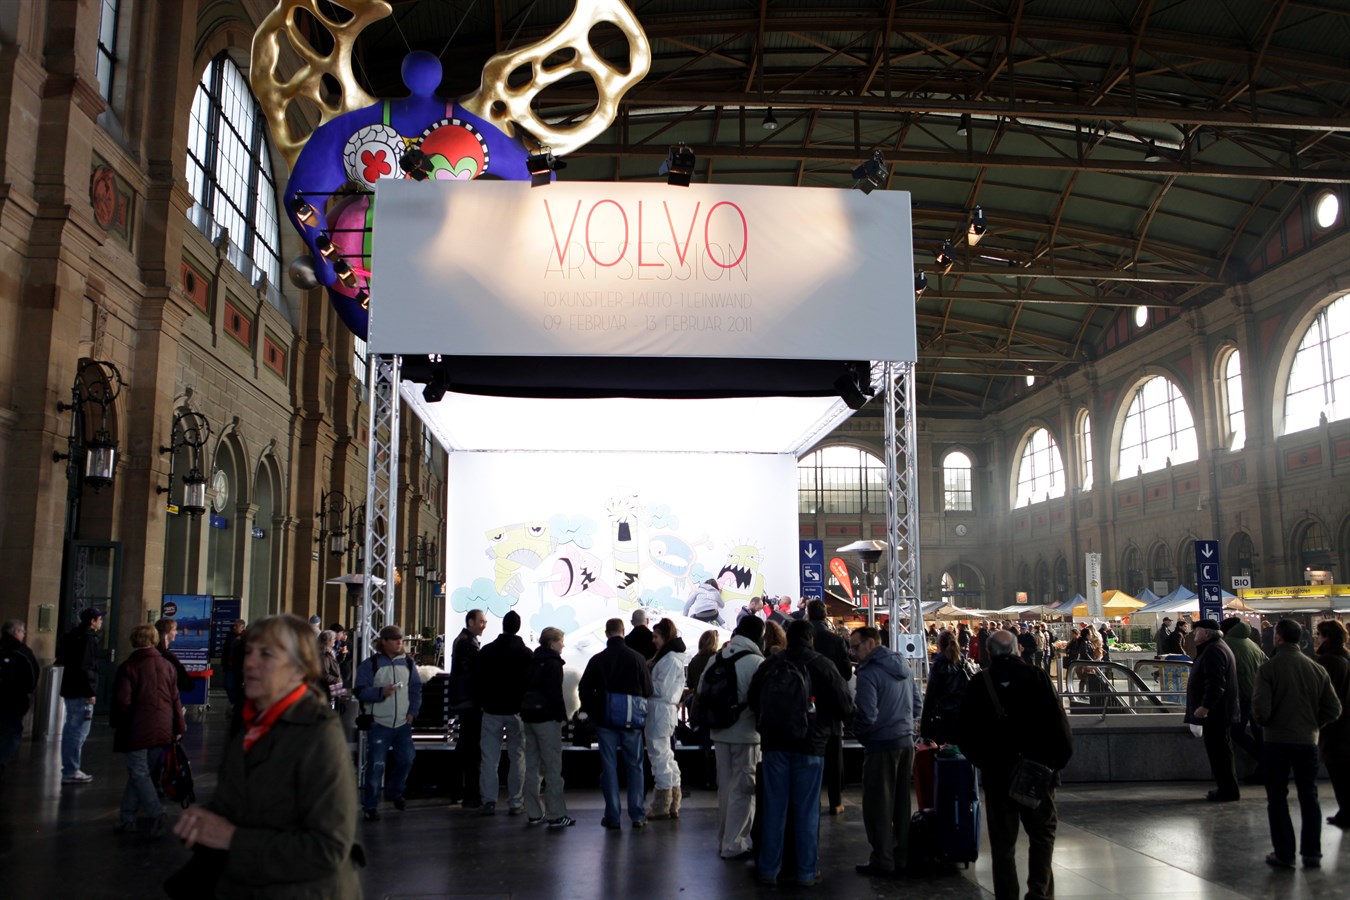 The Volvo S60 Art Session event at Zurich Main Station (railway station). The stage.